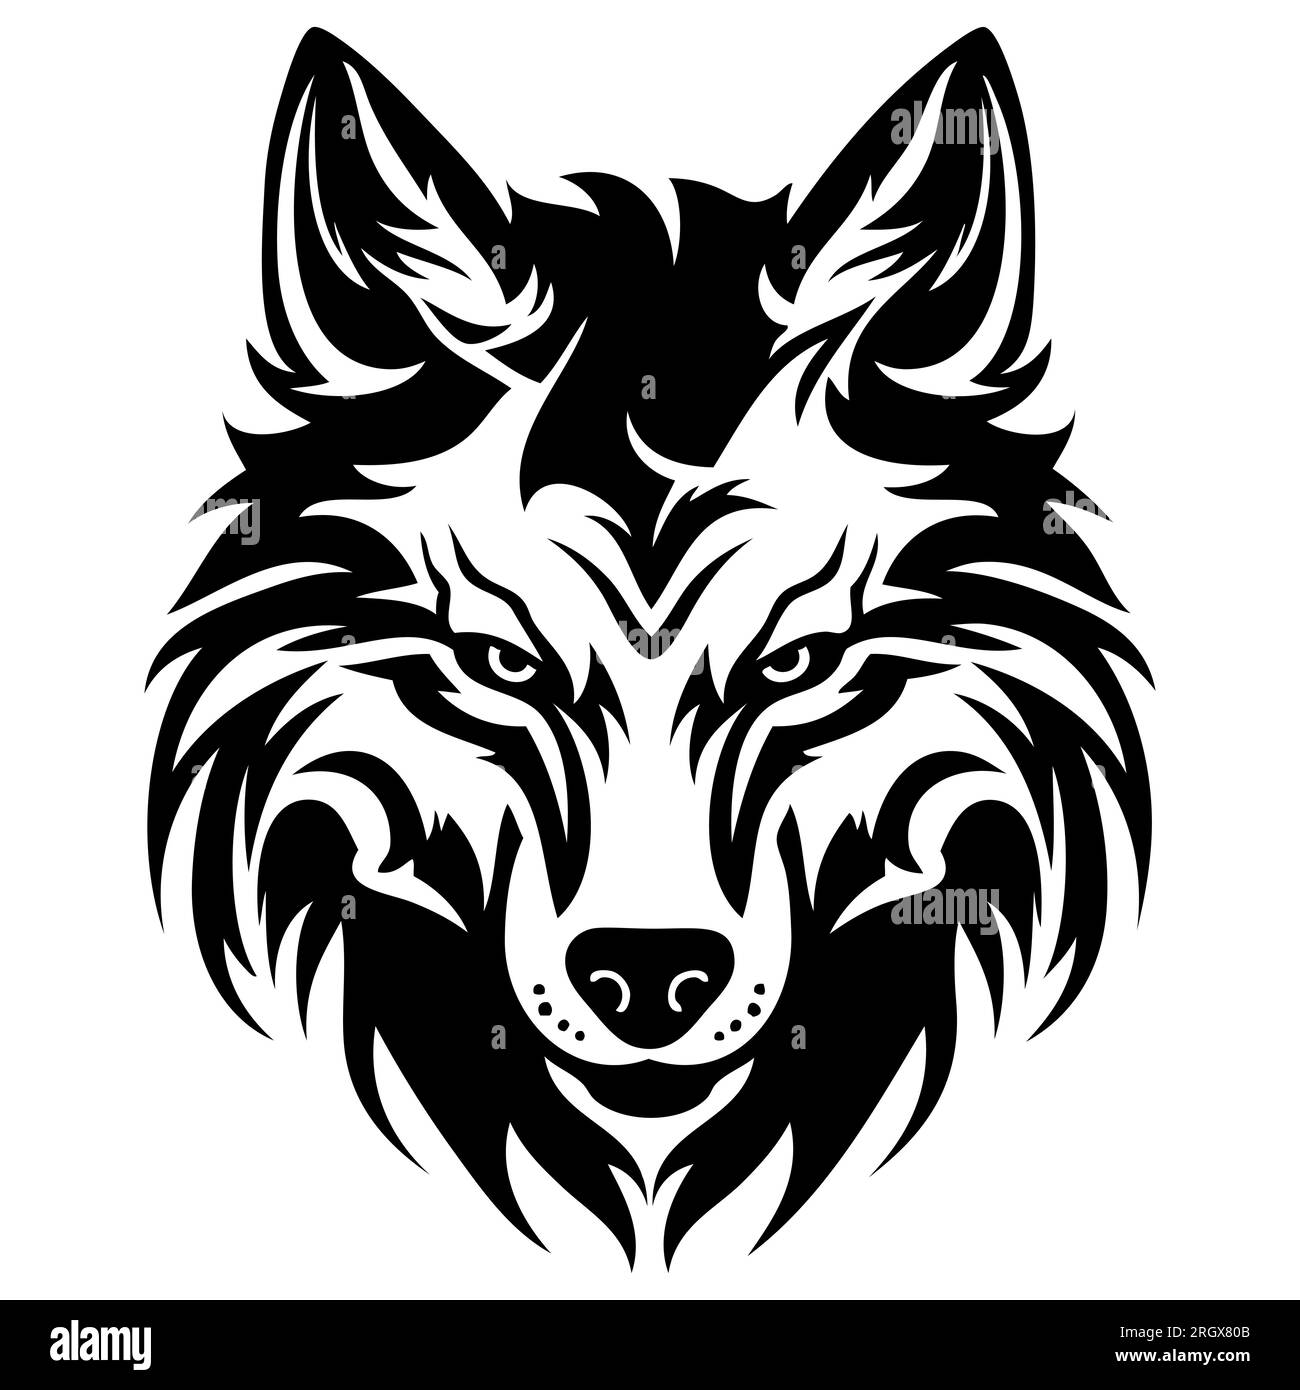 Wolf Head Silhouette, Wolf Face SVG, Pdf, Dxf, Png, Wolf Clipart, Wolf Logo Vector, T-Shirt cricut | Digital Download, Tribal Black & White Tattoo Art Stock Photo